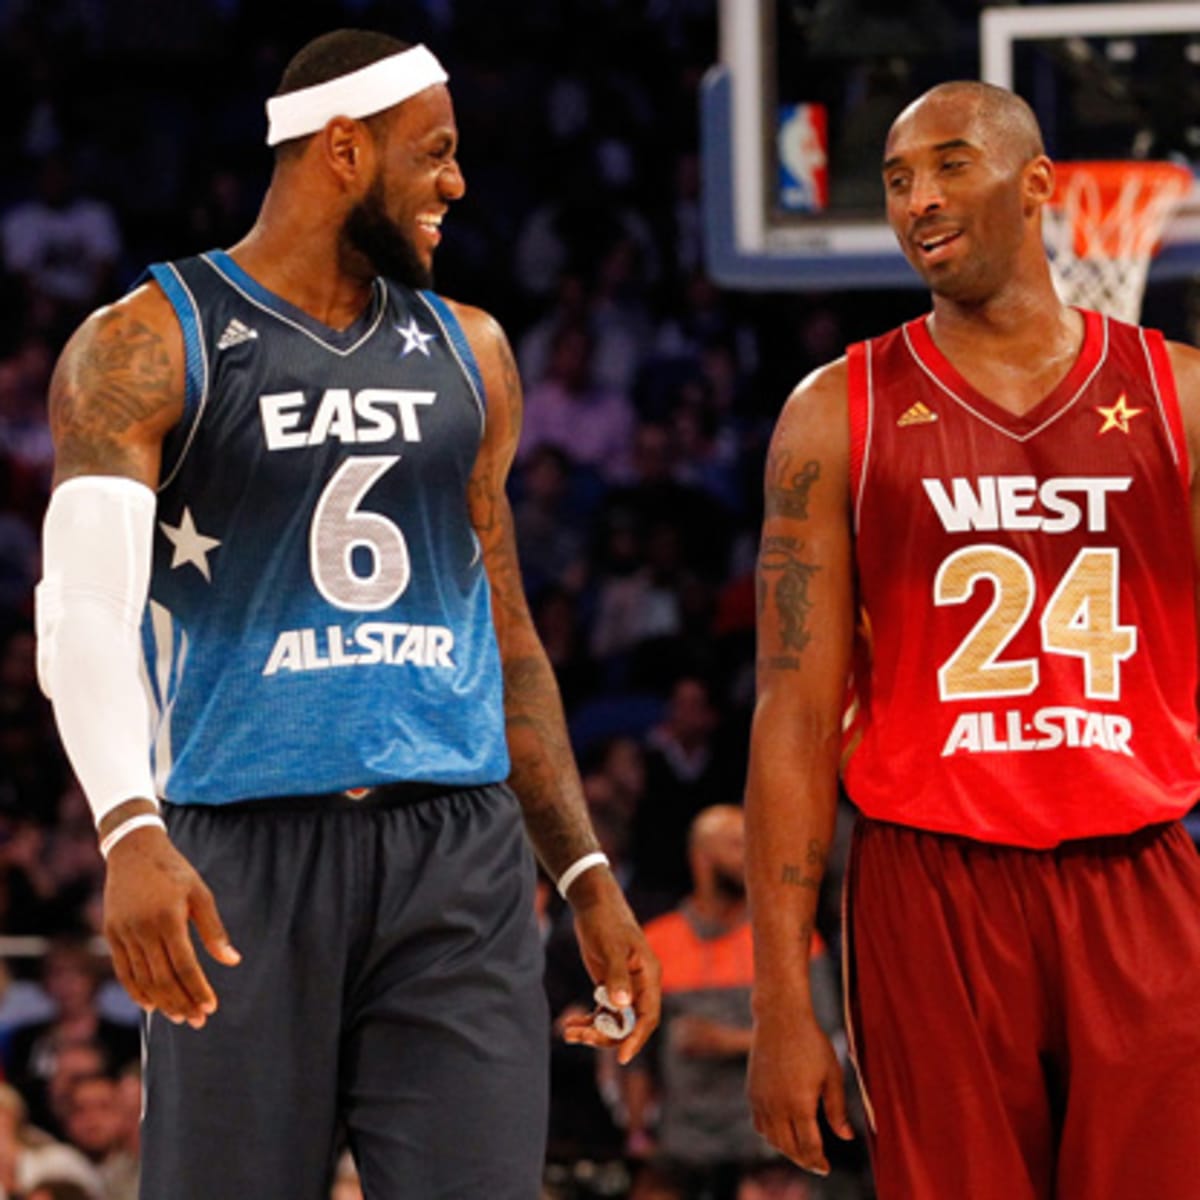 James and Wade Selected as 2012 NBA All-Star Starters